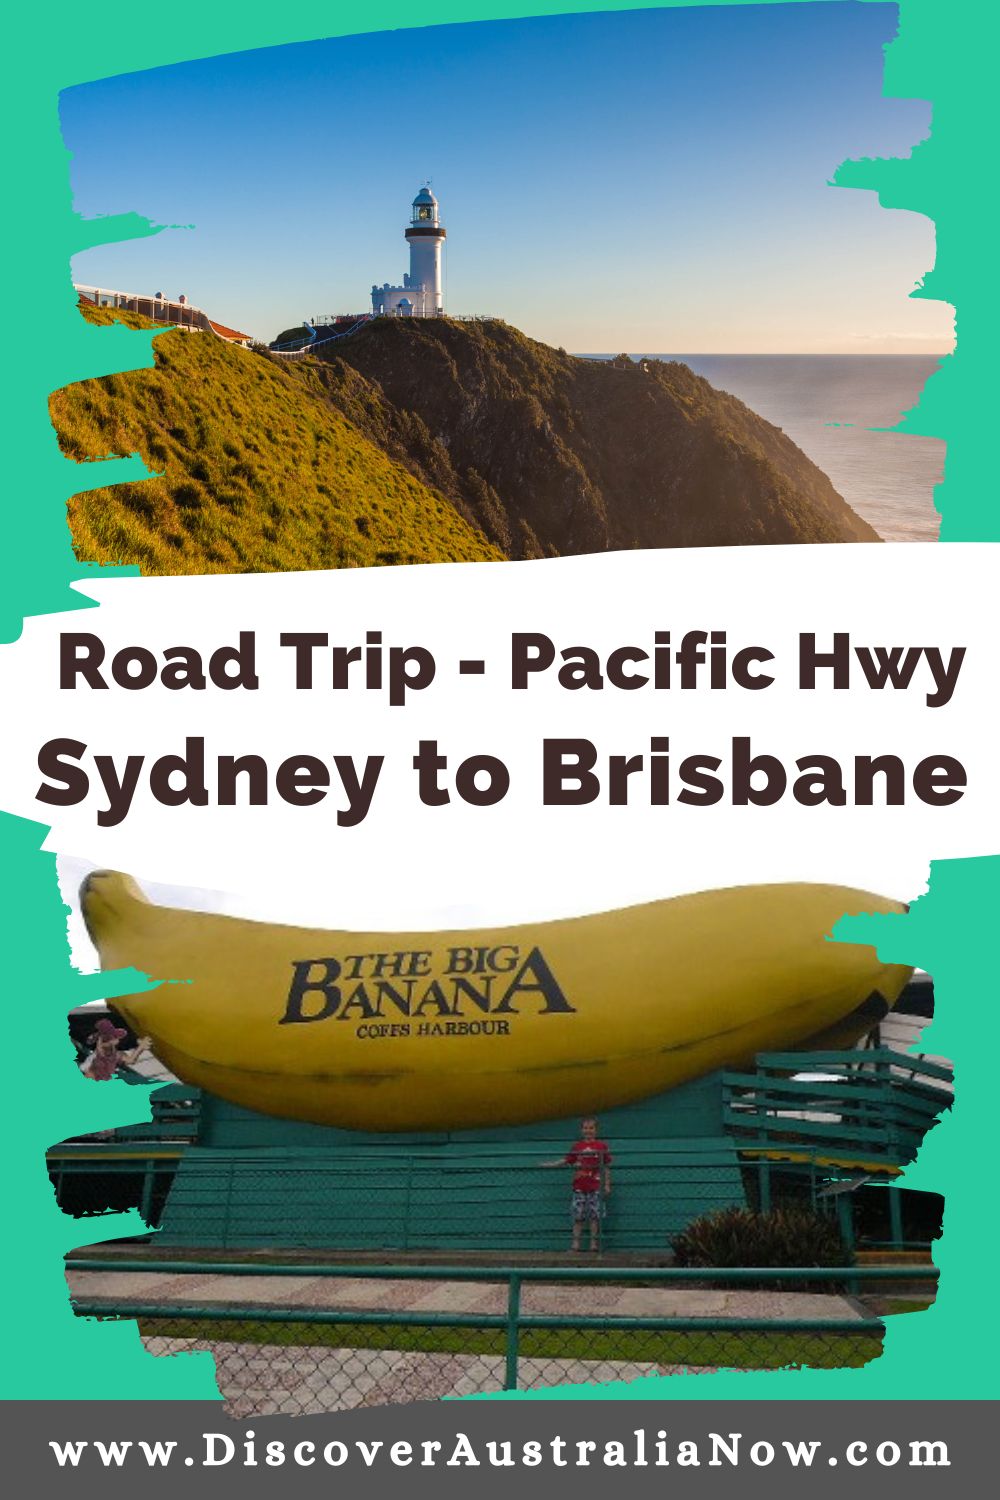 The Big Banana at Coffs Harbour and the Byron Bay Lighthouse are highlights to see on a Pacific Highway Road from Sydney to Brisbane.